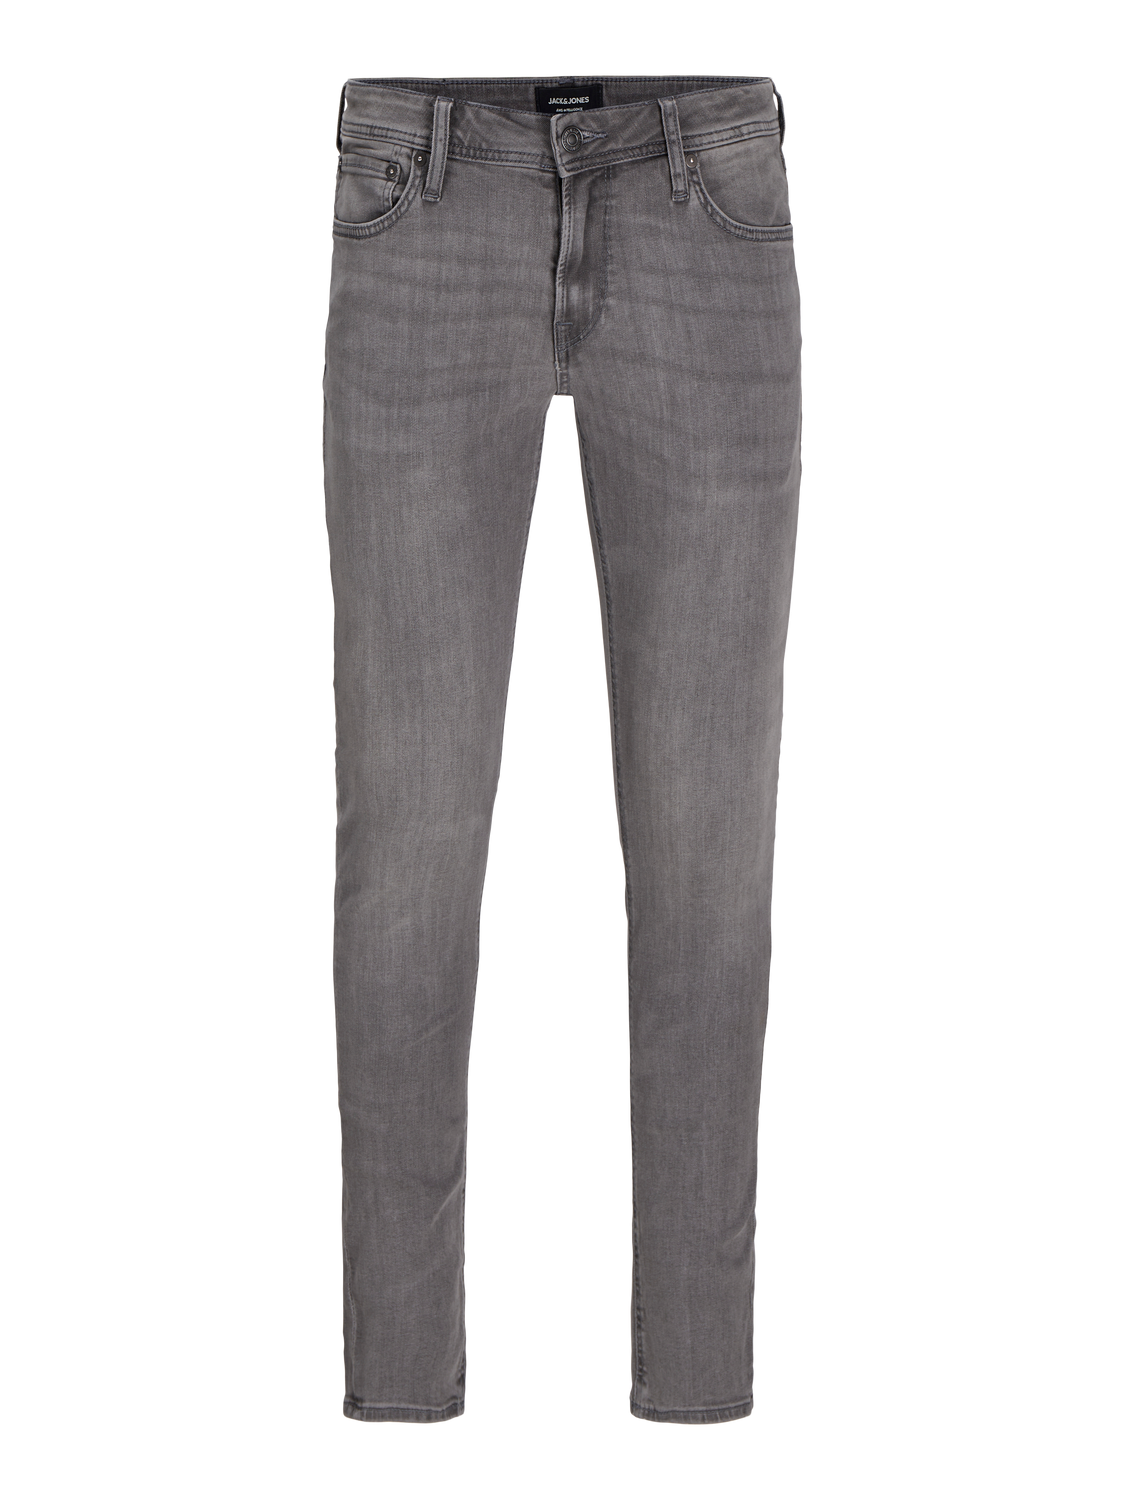 Aggregate more than 219 jack and jones grey jeans